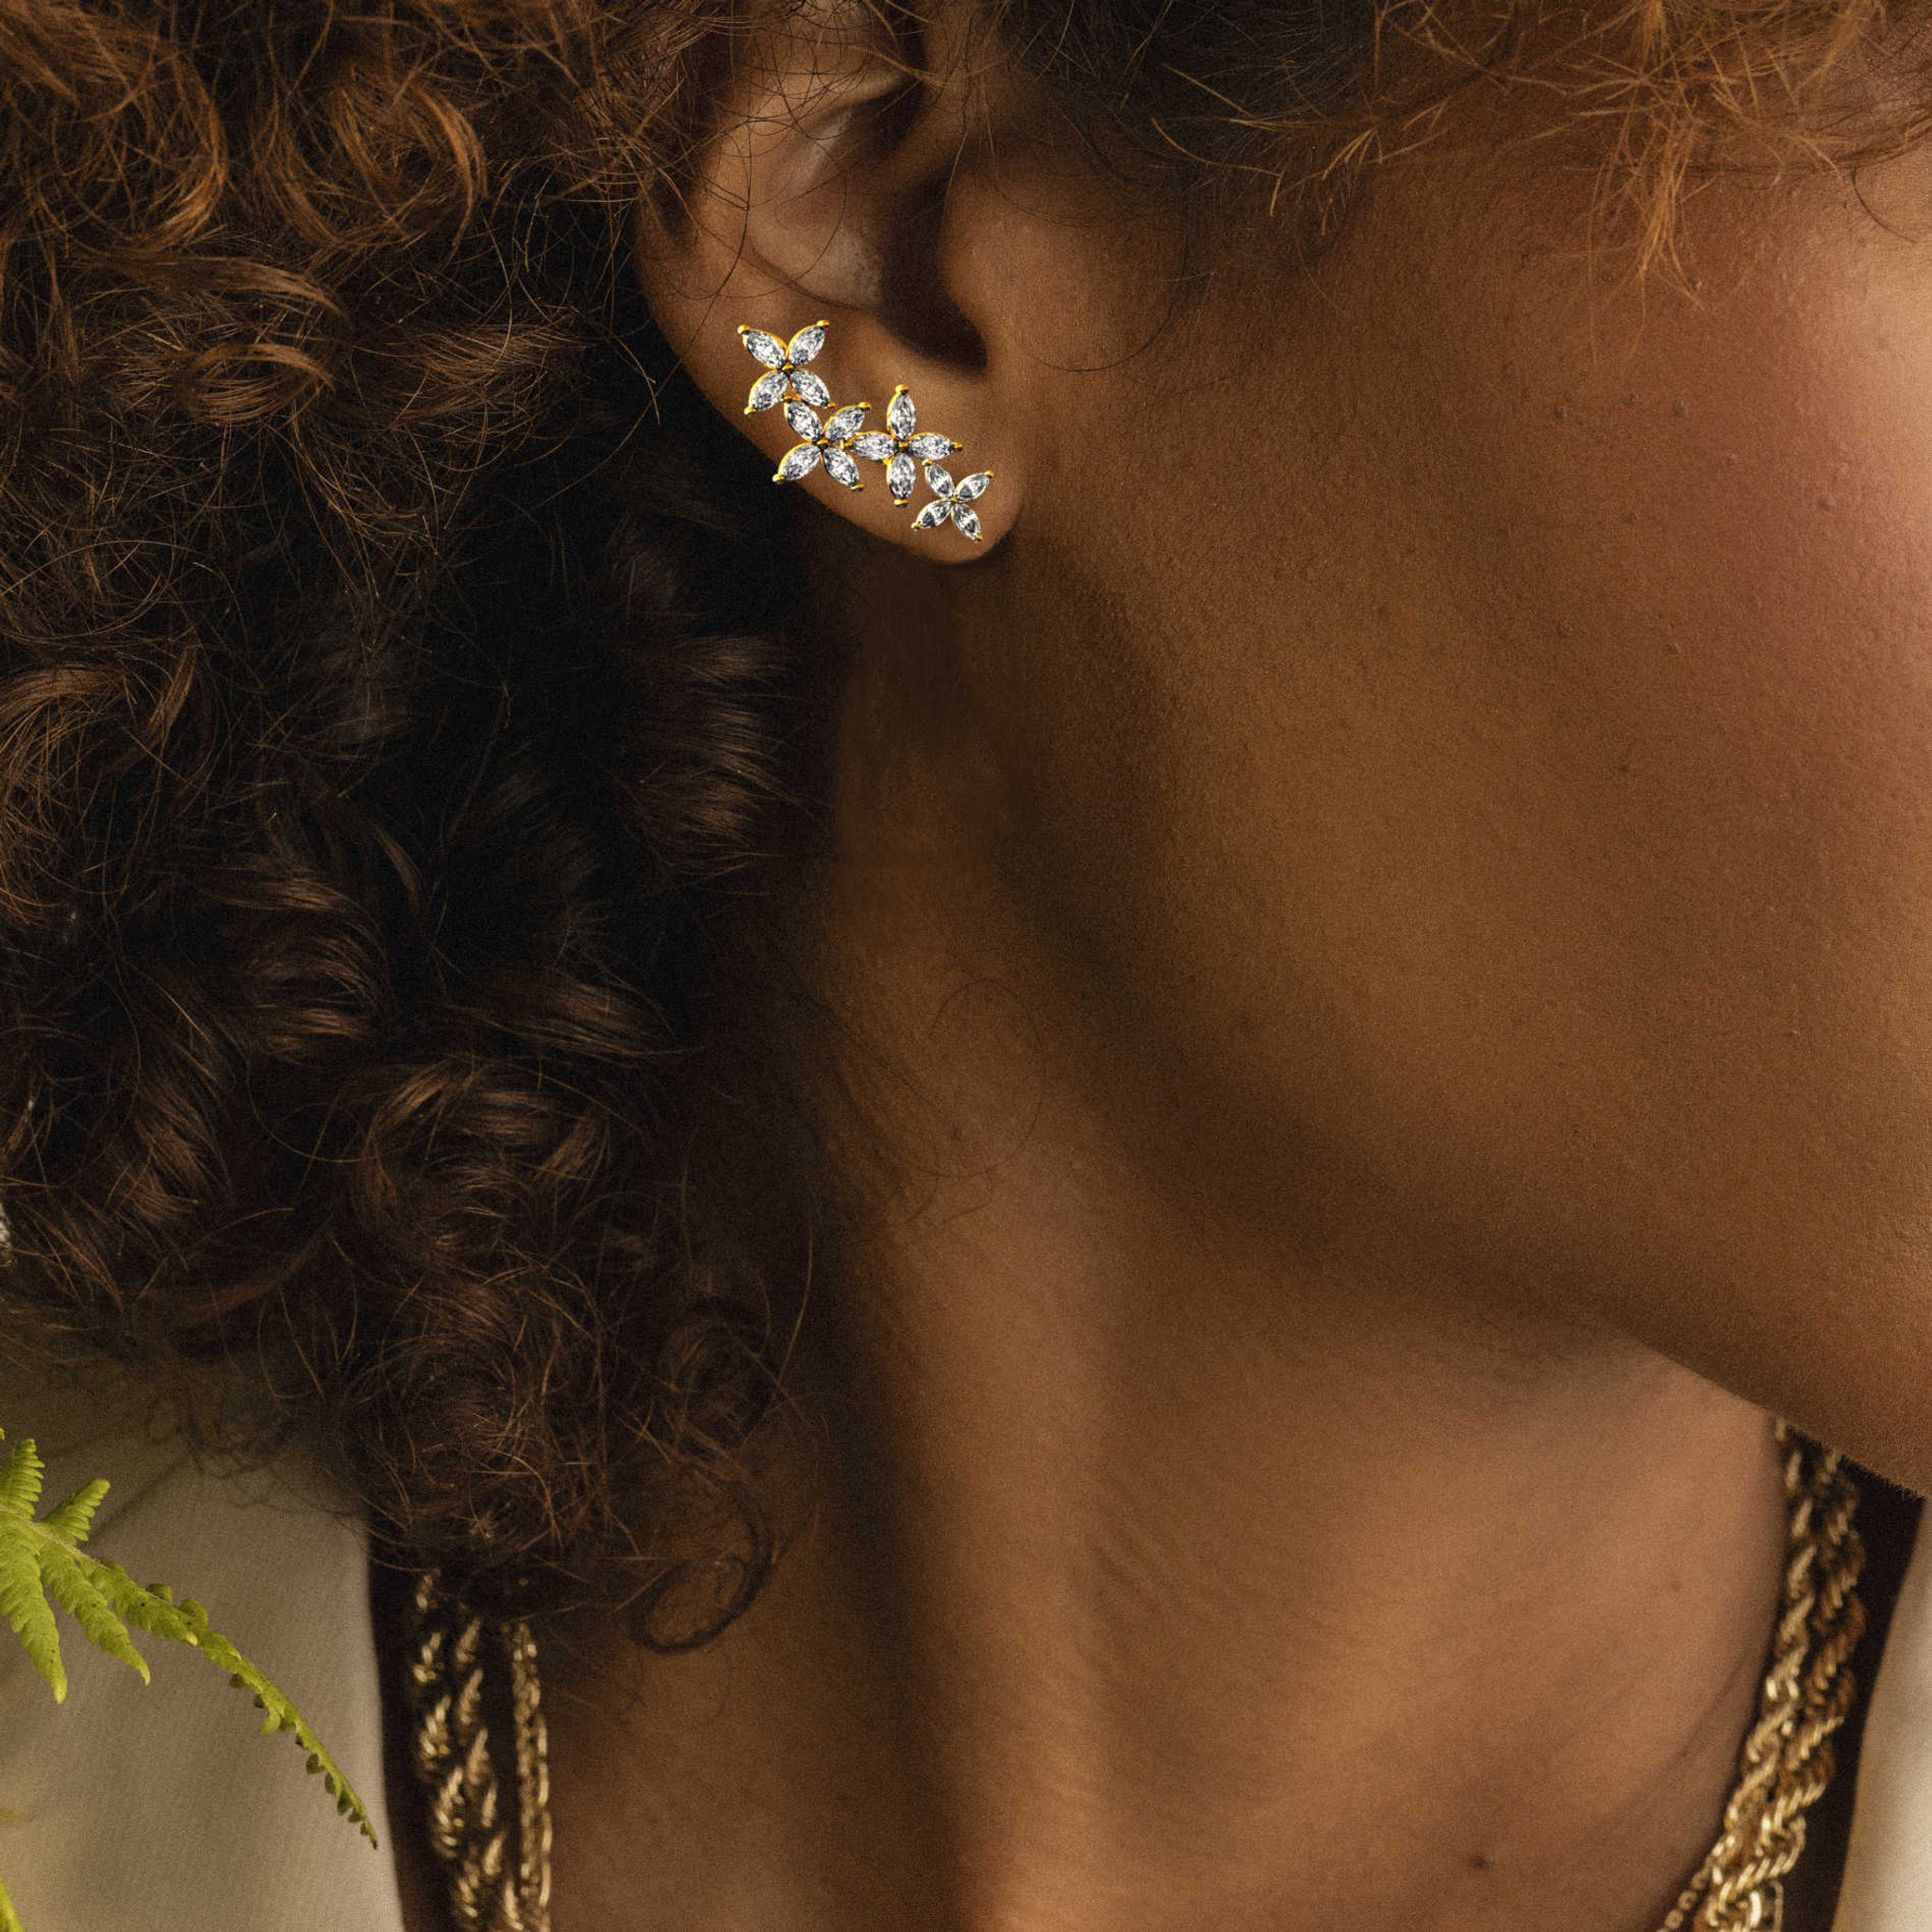 Adorning elegance on a dark-skinned model, our Diamond Ear Crawler Earring stacking with our Diamond Star Stud Earring to create a unique style.